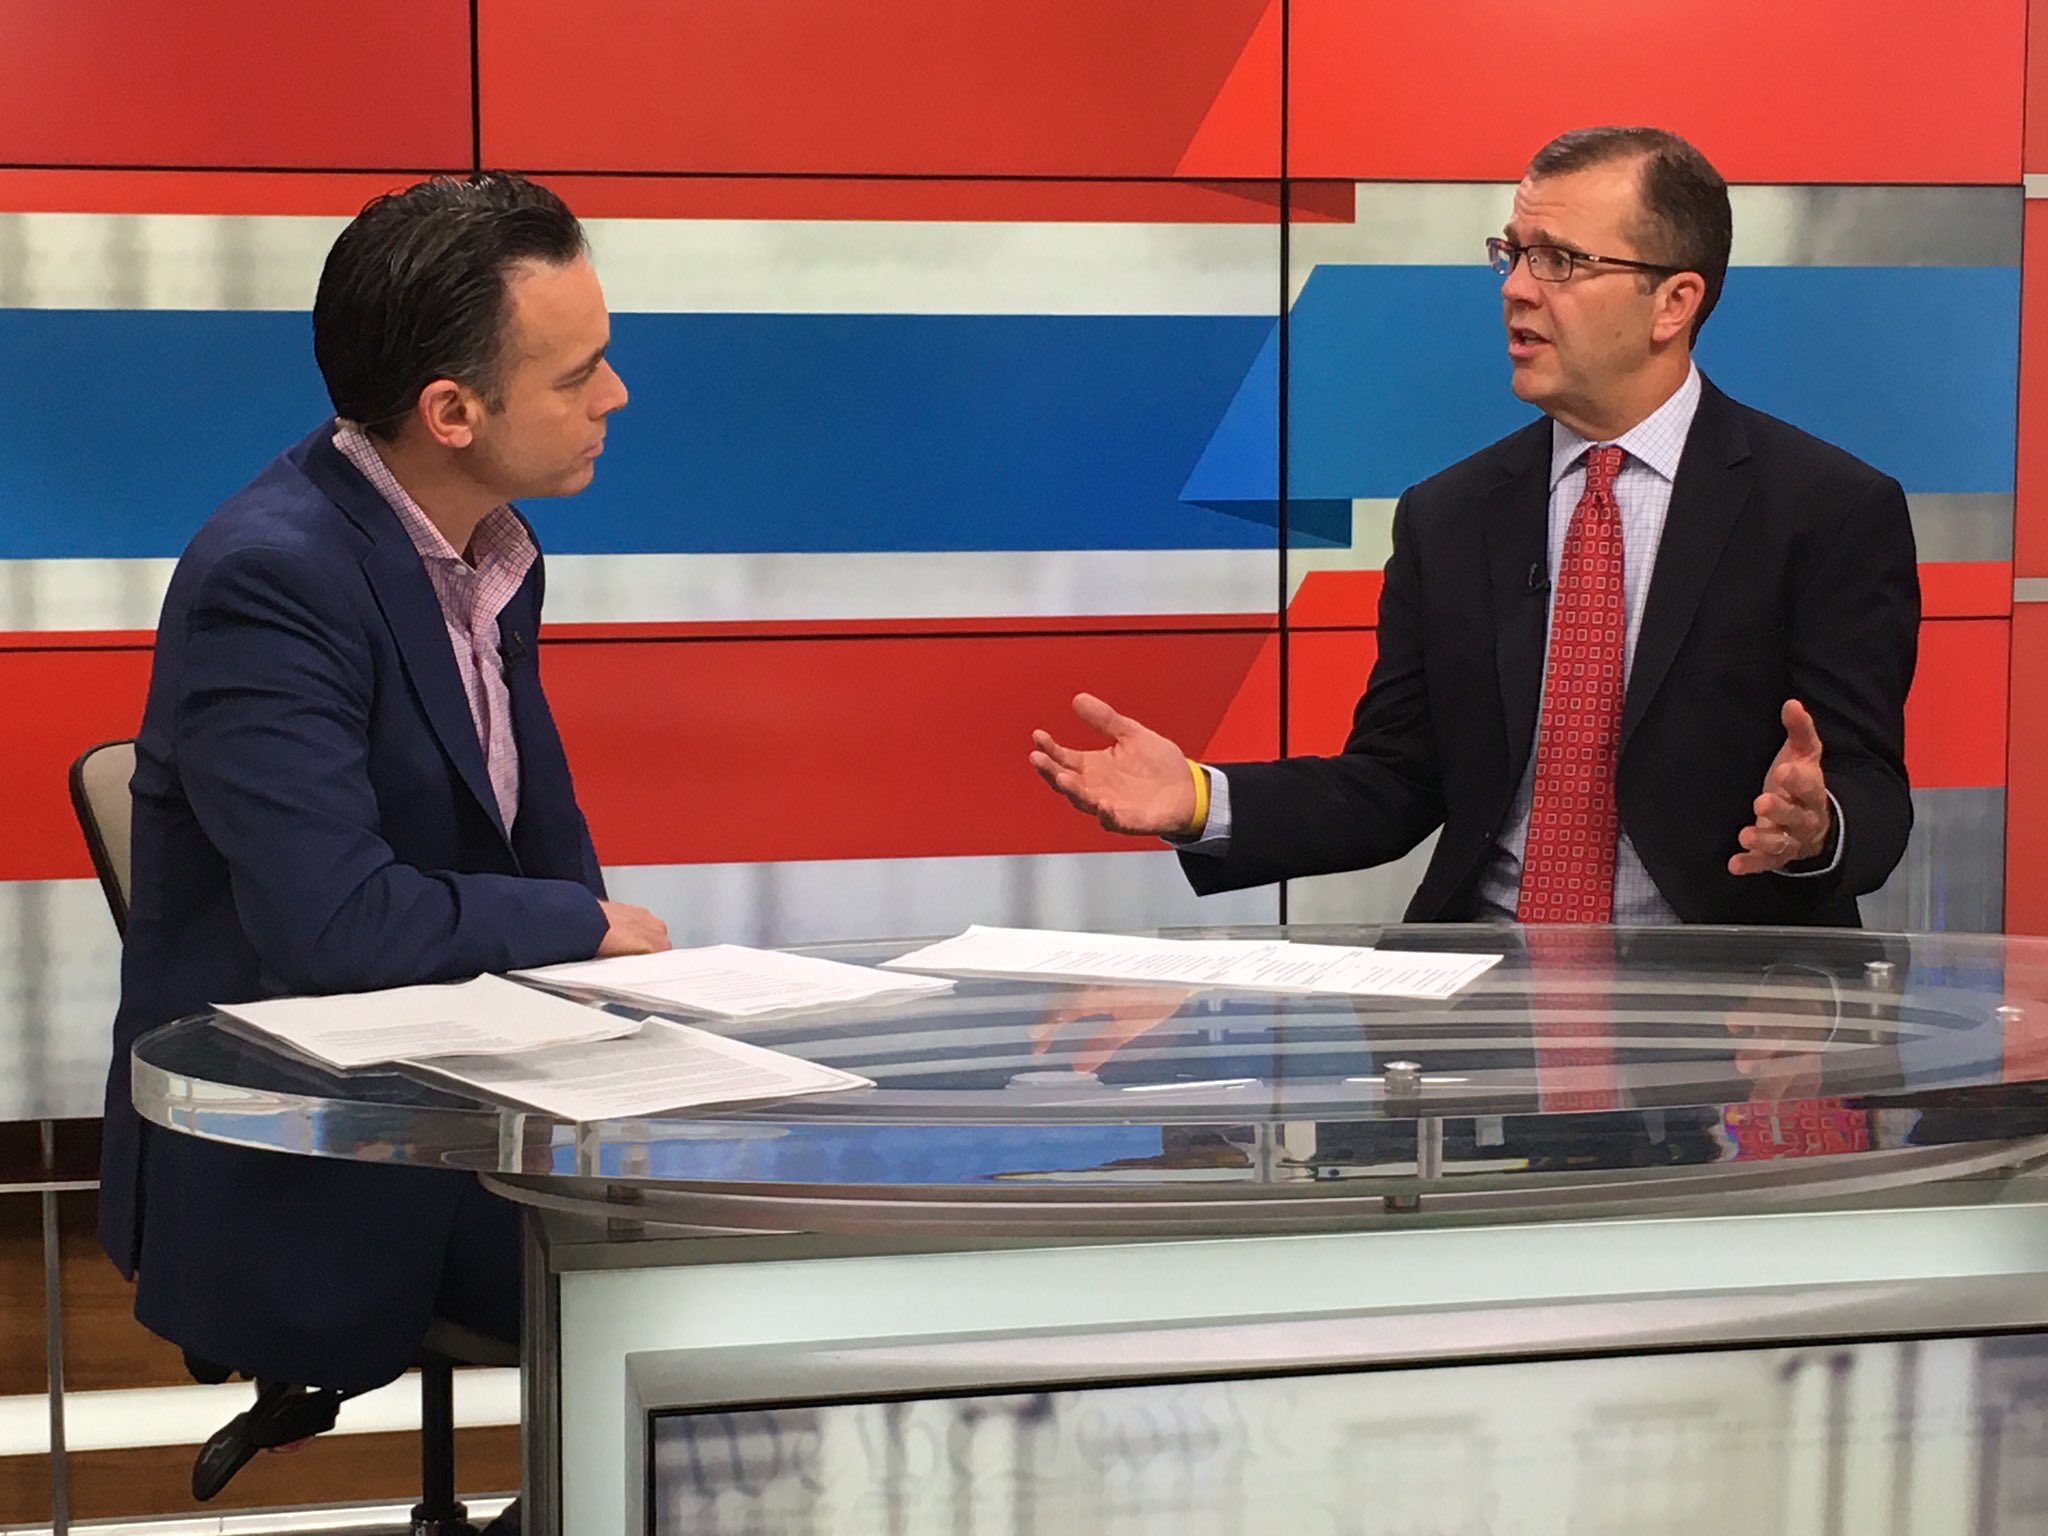  Brian Schactman had me on NECN’s “Primary Source” show to speak about diplomacy, impeachment, and the 2020 primary campaign. 